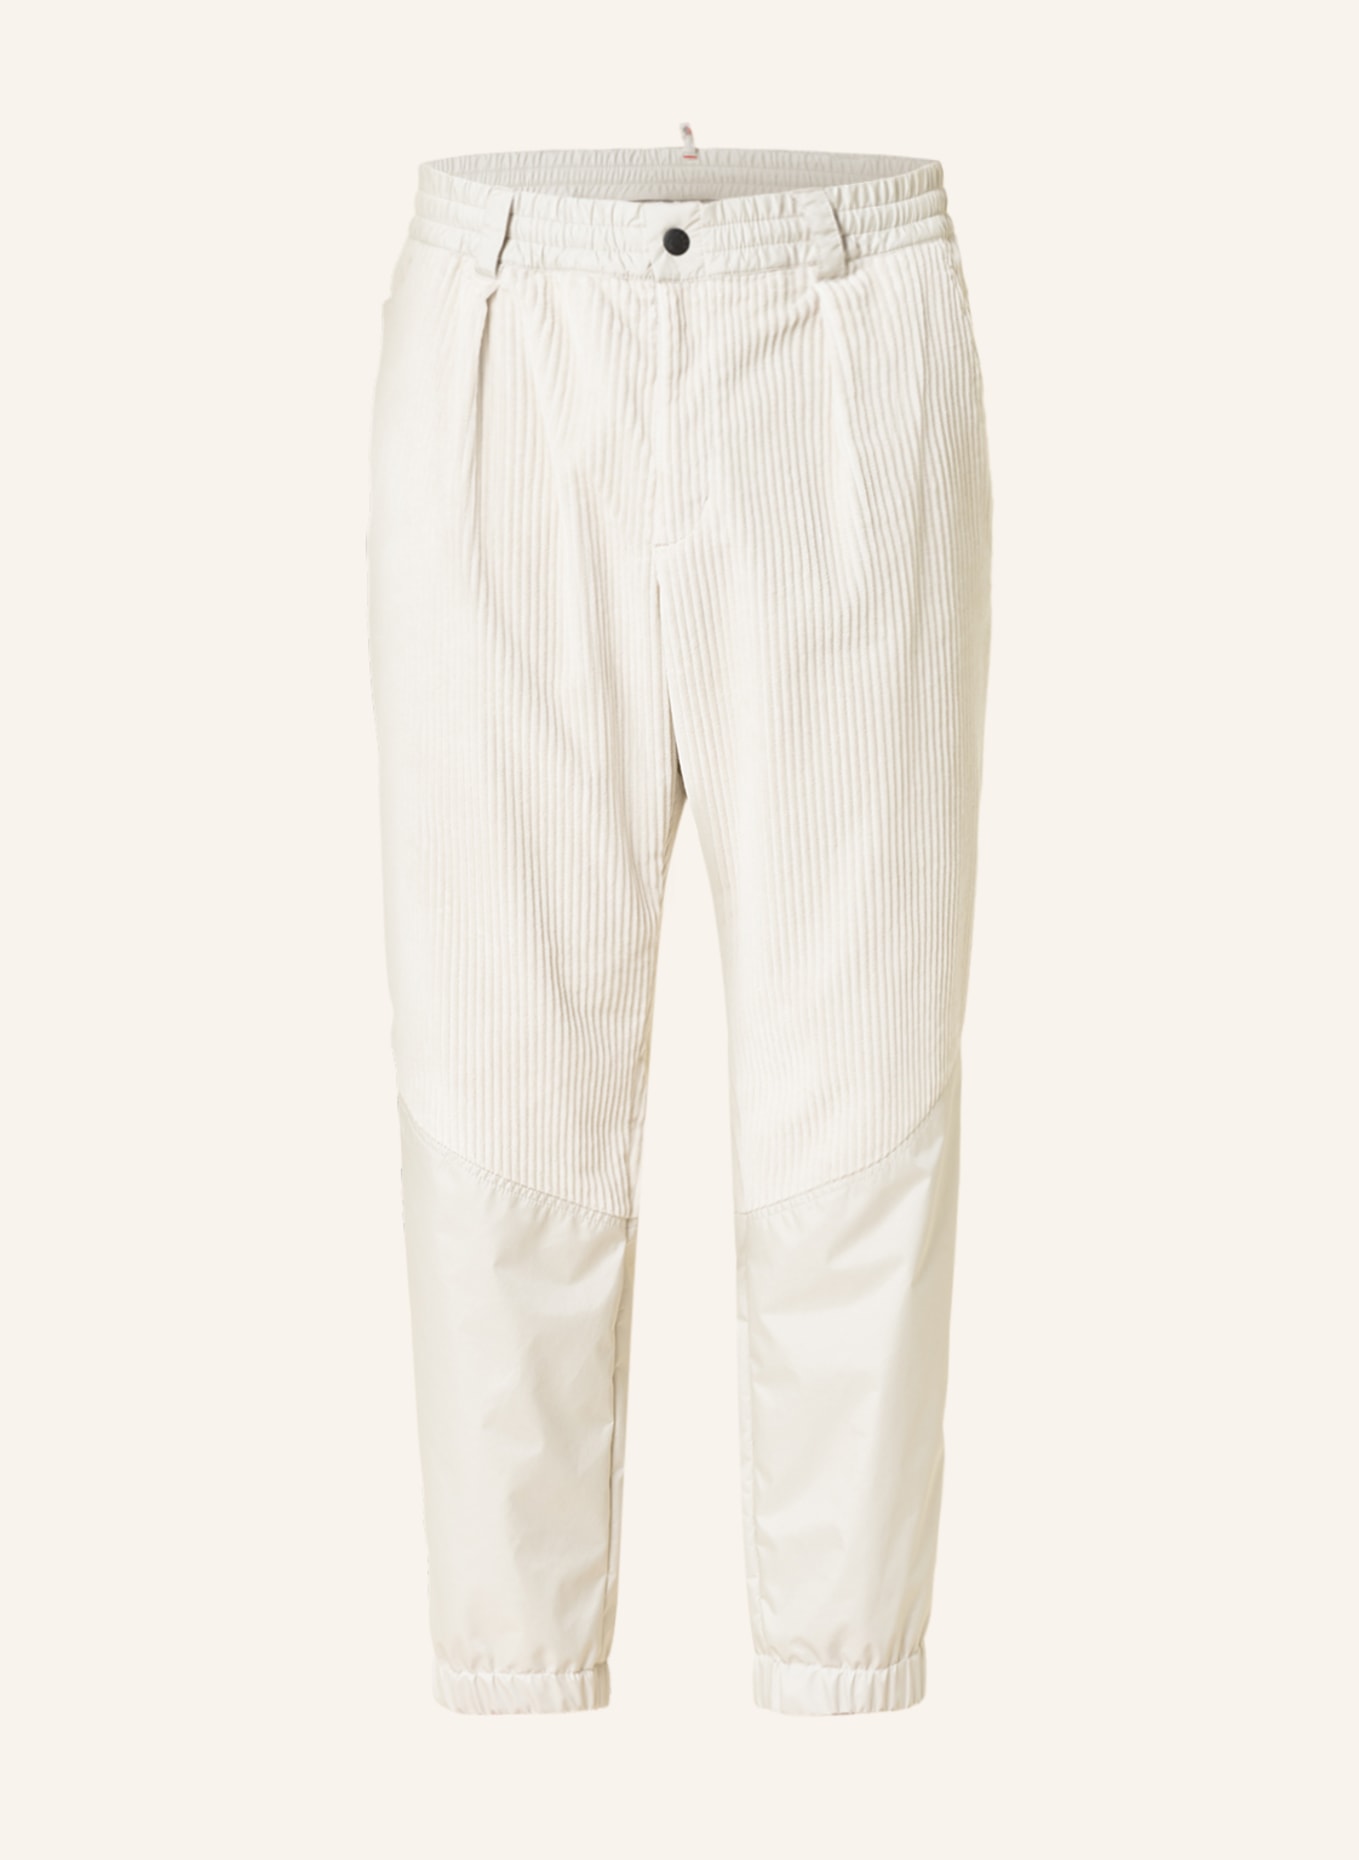 MONCLER GRENOBLE Functional pants in mixed materials , Color: LIGHT GRAY (Image 1)